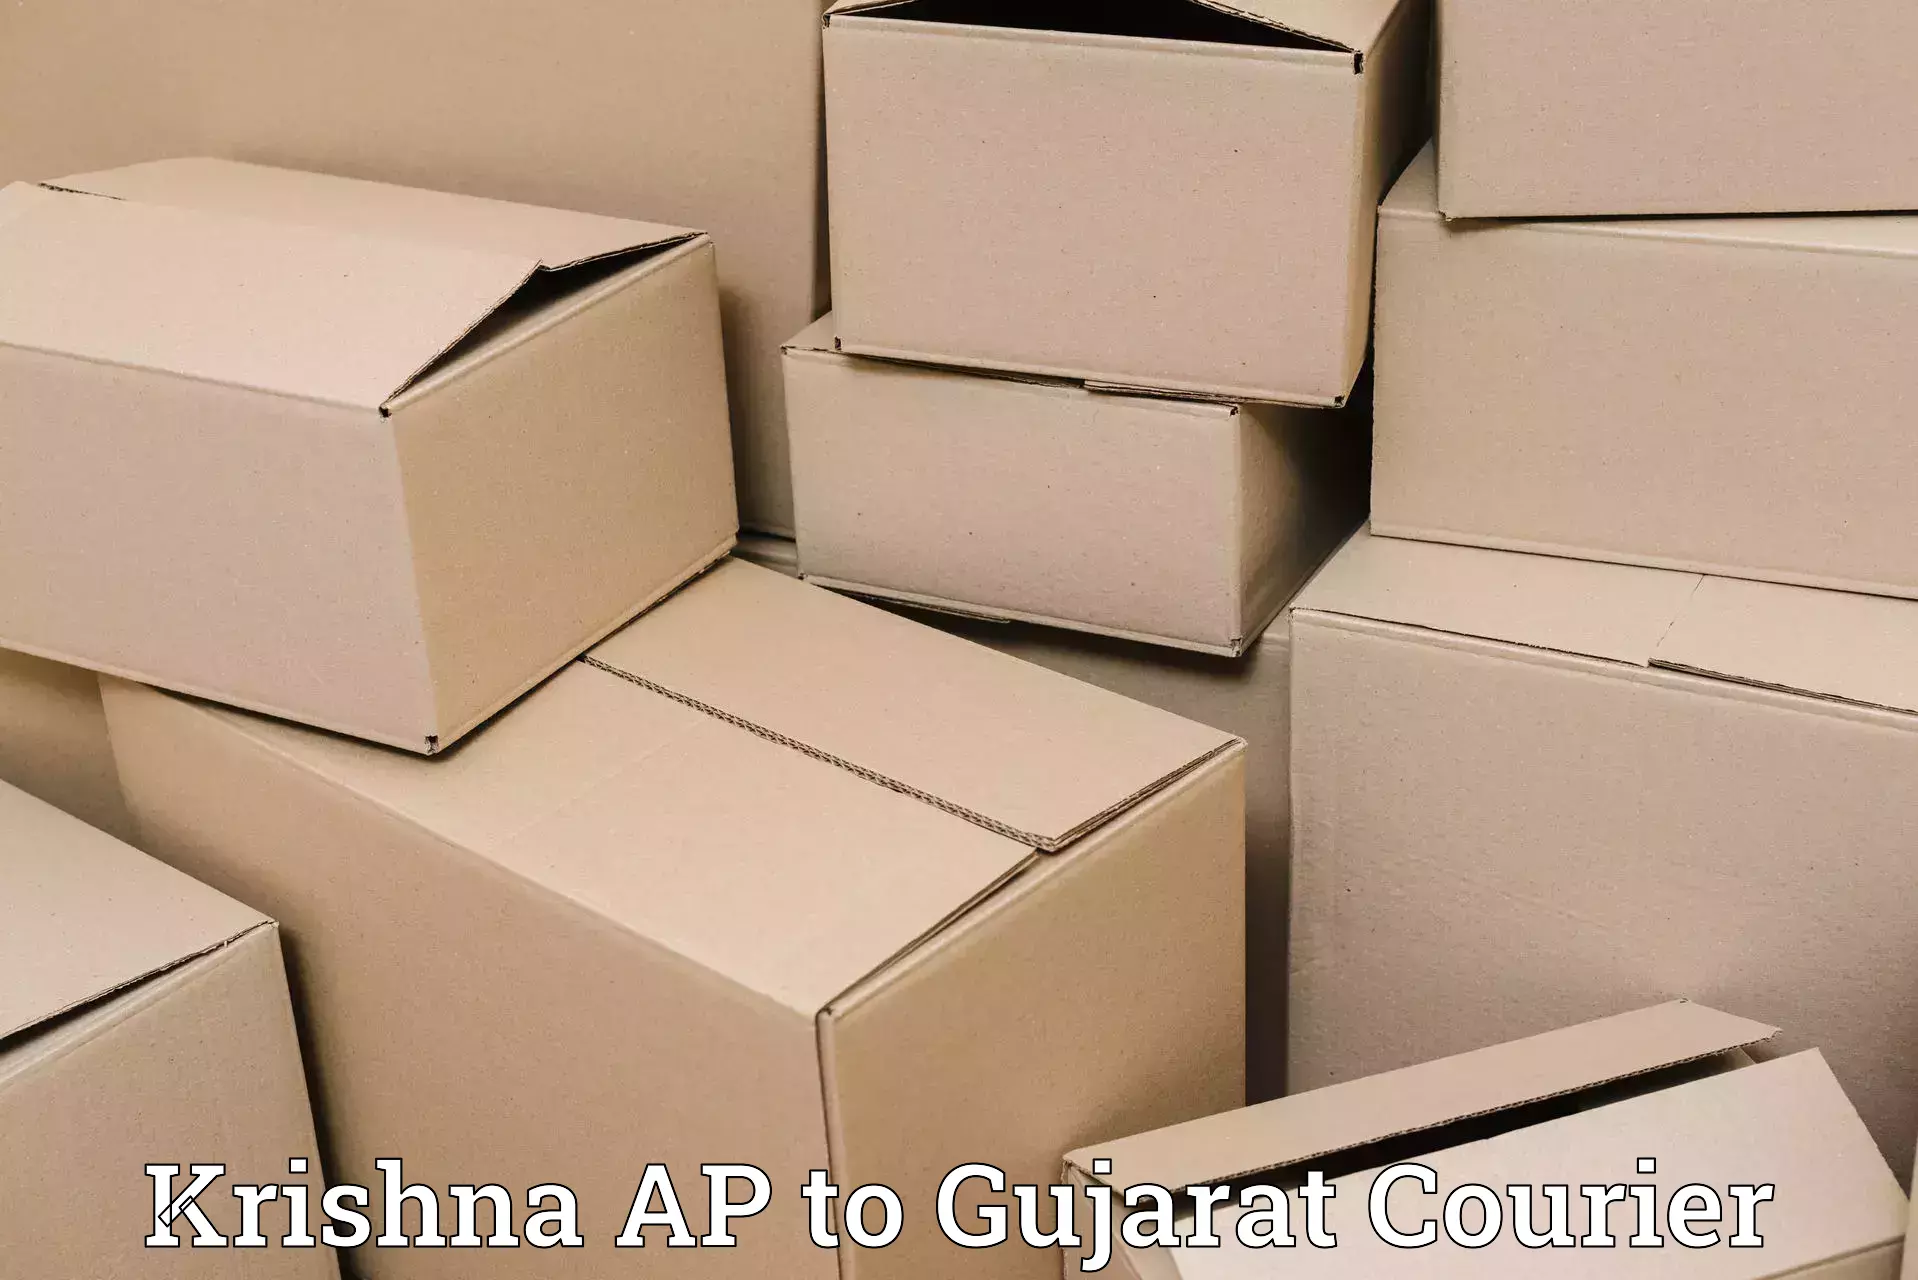 On-demand courier Krishna AP to Godhra